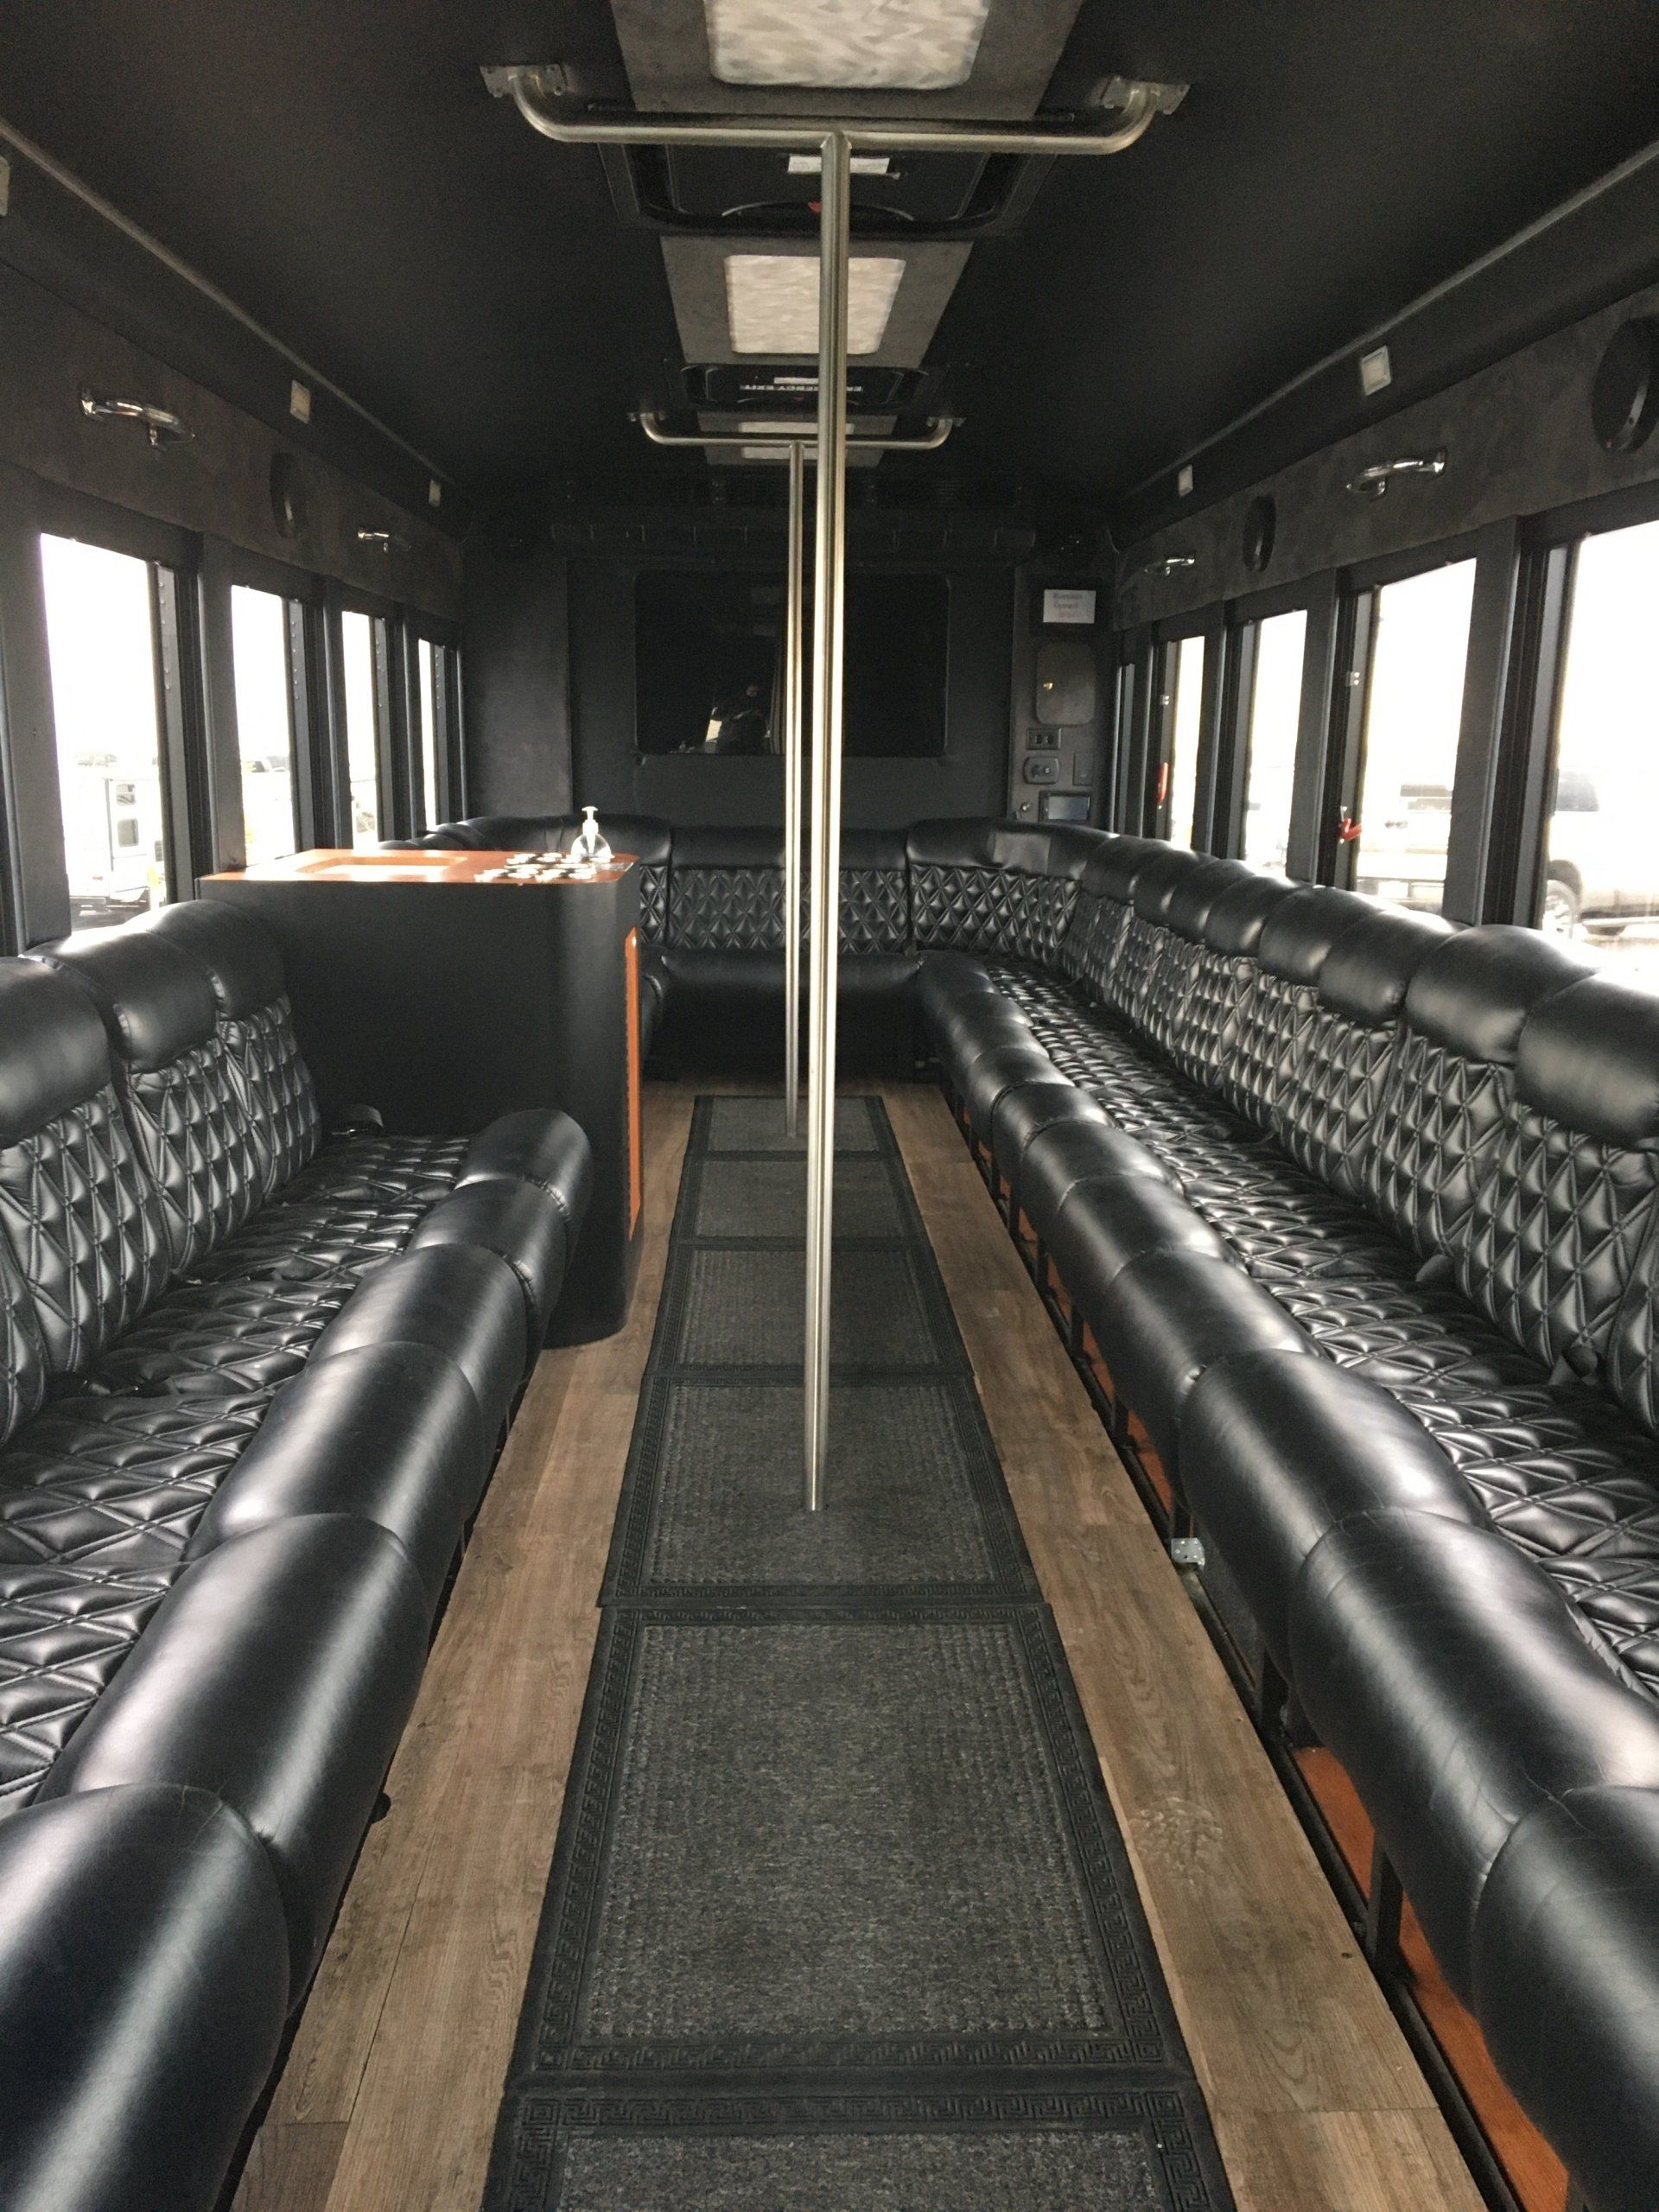 international 26 passenger party bus full interior day view